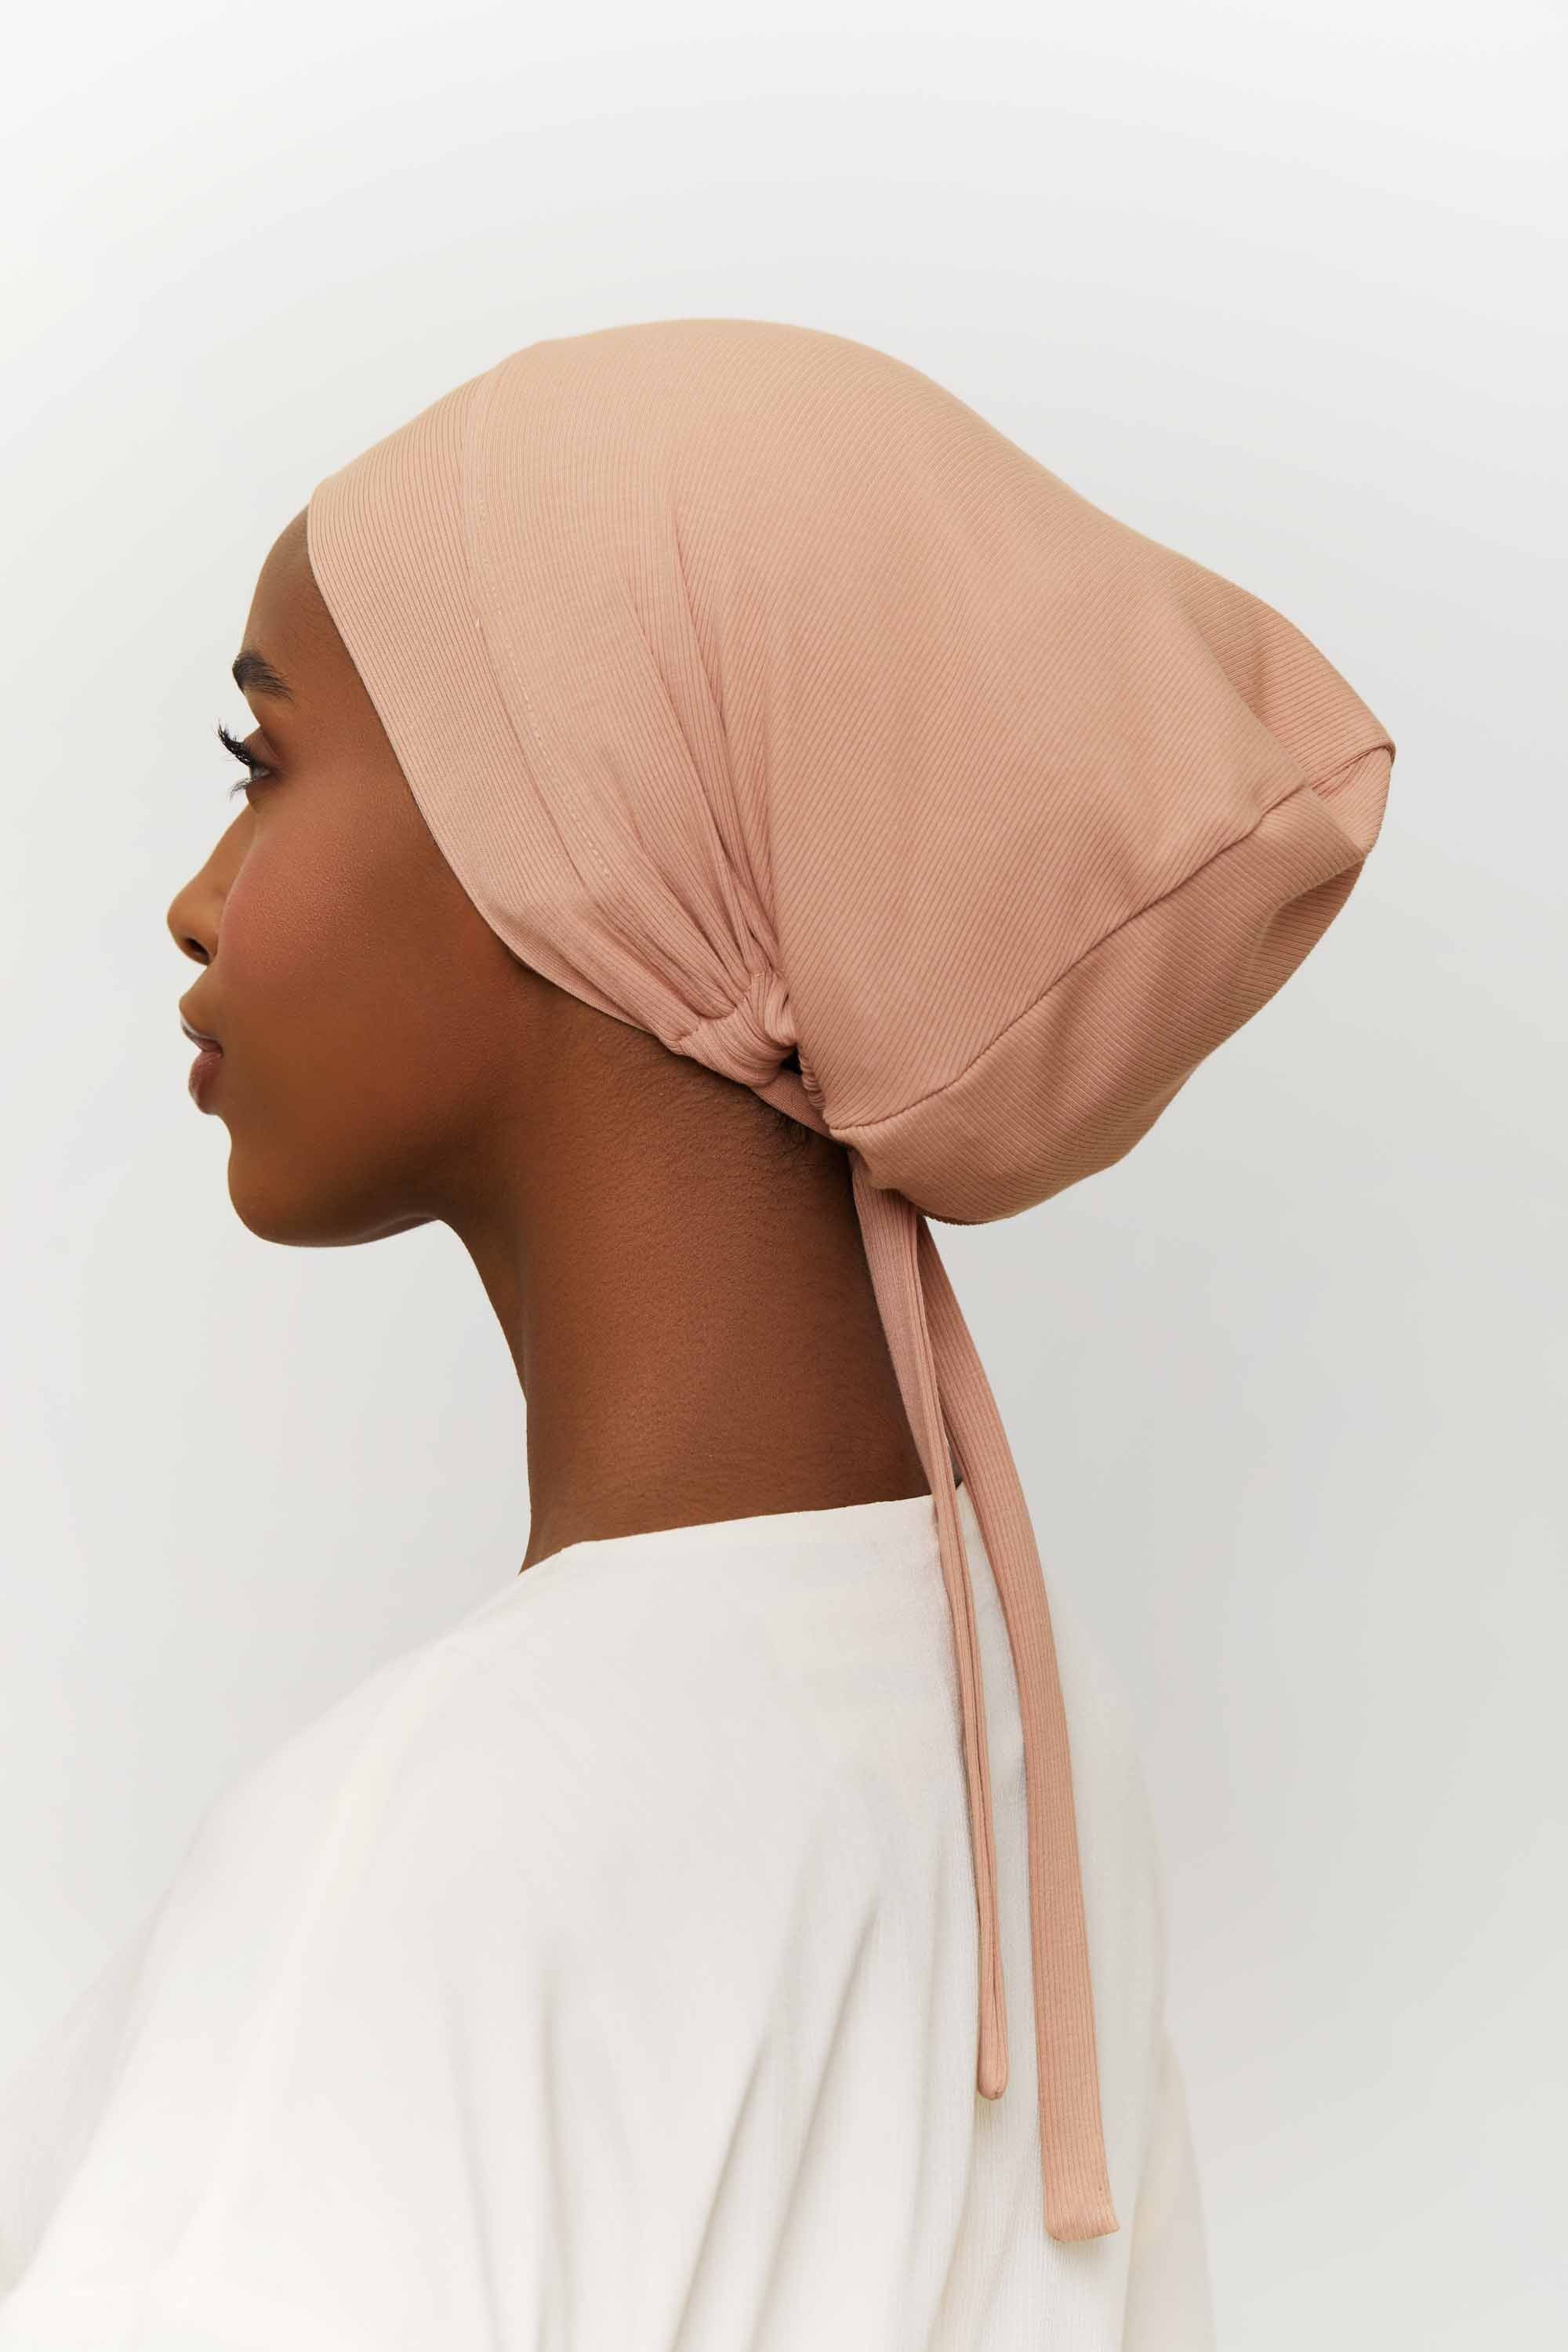 Ribbed Tie Back Undercap - Cafe au Lait Extra Small Accessories Veiled 